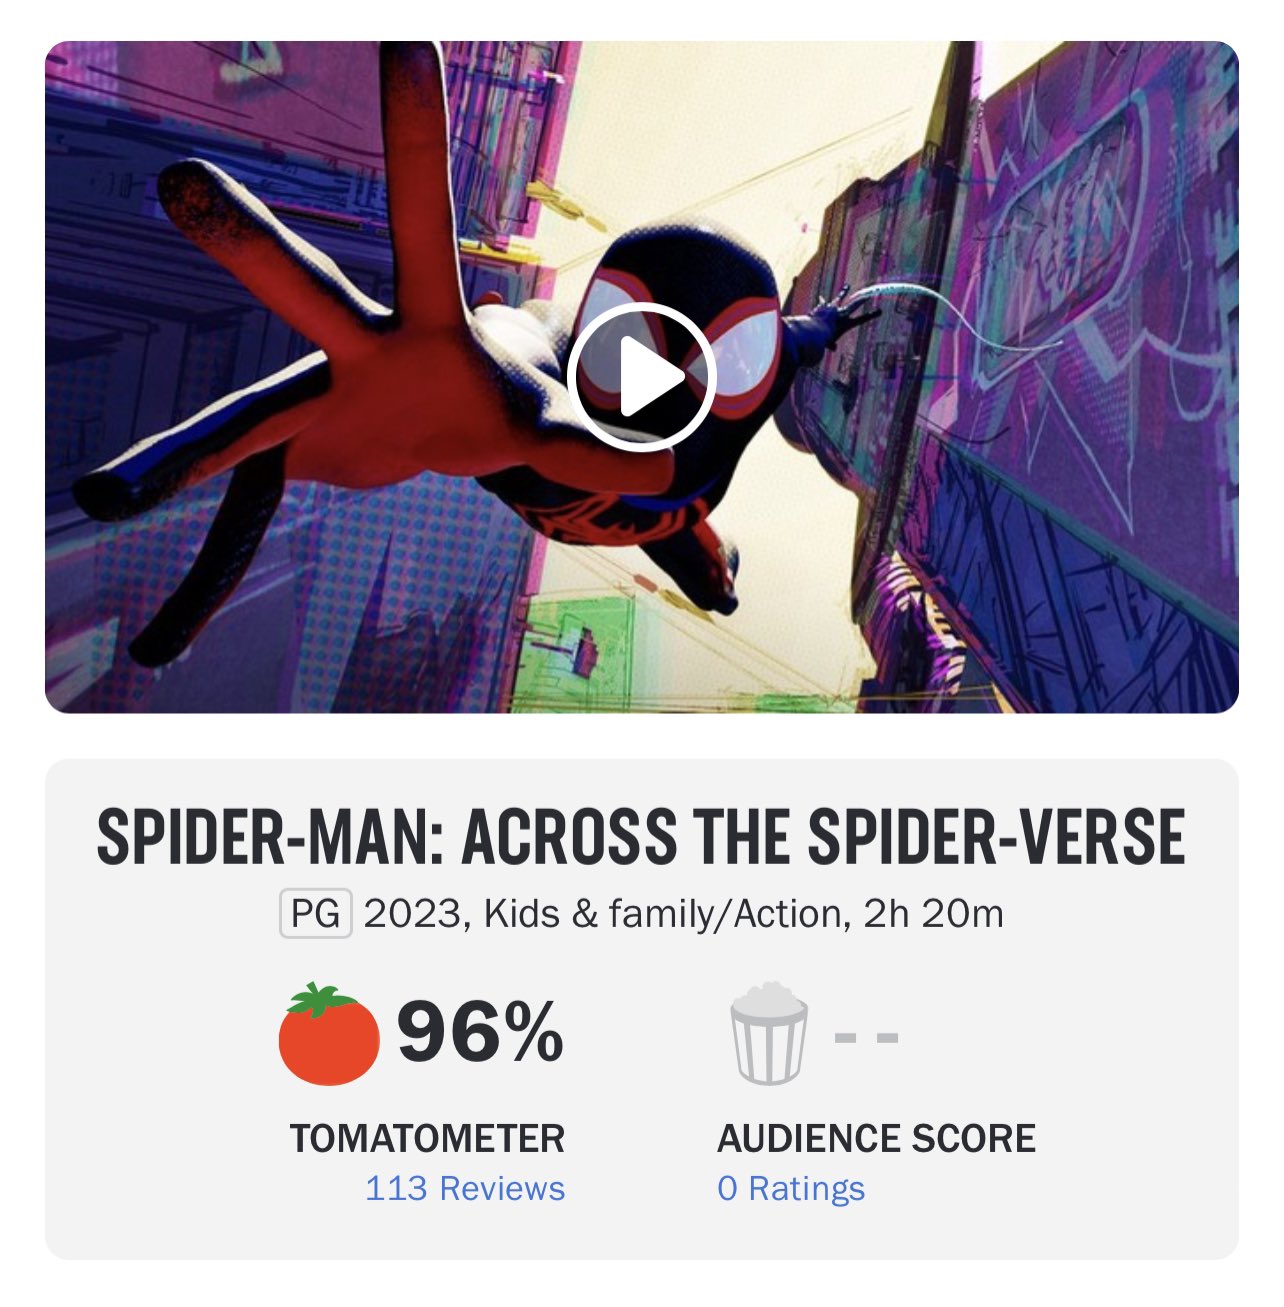 Daily Bugle Spidey - #SpiderMan: Across the #SpiderVerse and Spider-Man:  Into the Spider-Verse are neck and neck on Rotten🍅Tomatoes, but both  movies scored much higher than almost every live-action Spider-Man movie.  With